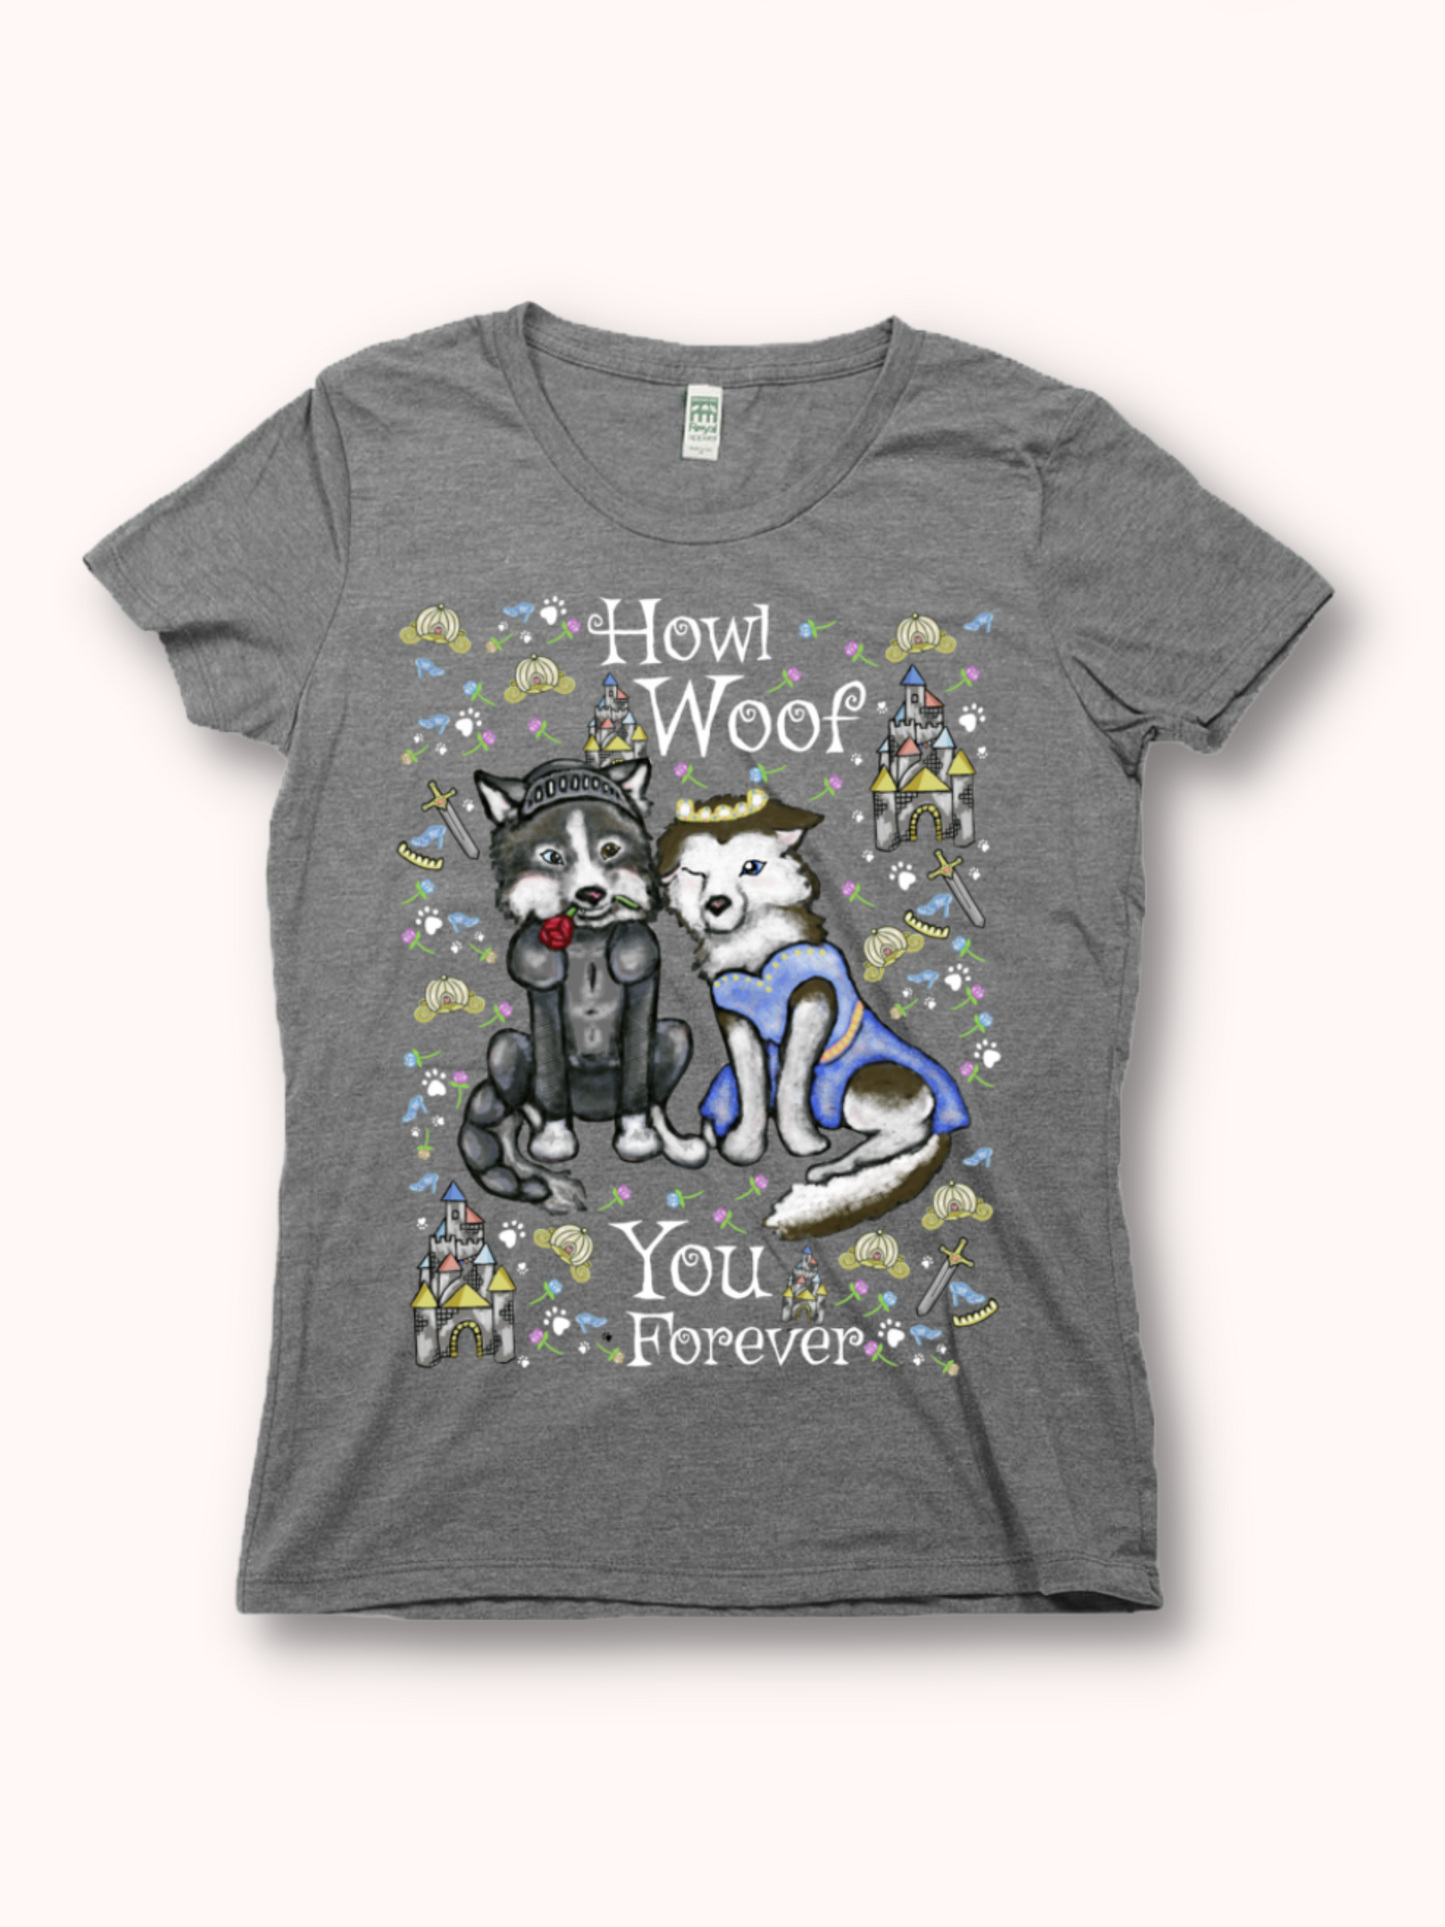 Howl Woof You - Women's - Eco-Friendly Organic & Recycled USA Made T-shirt